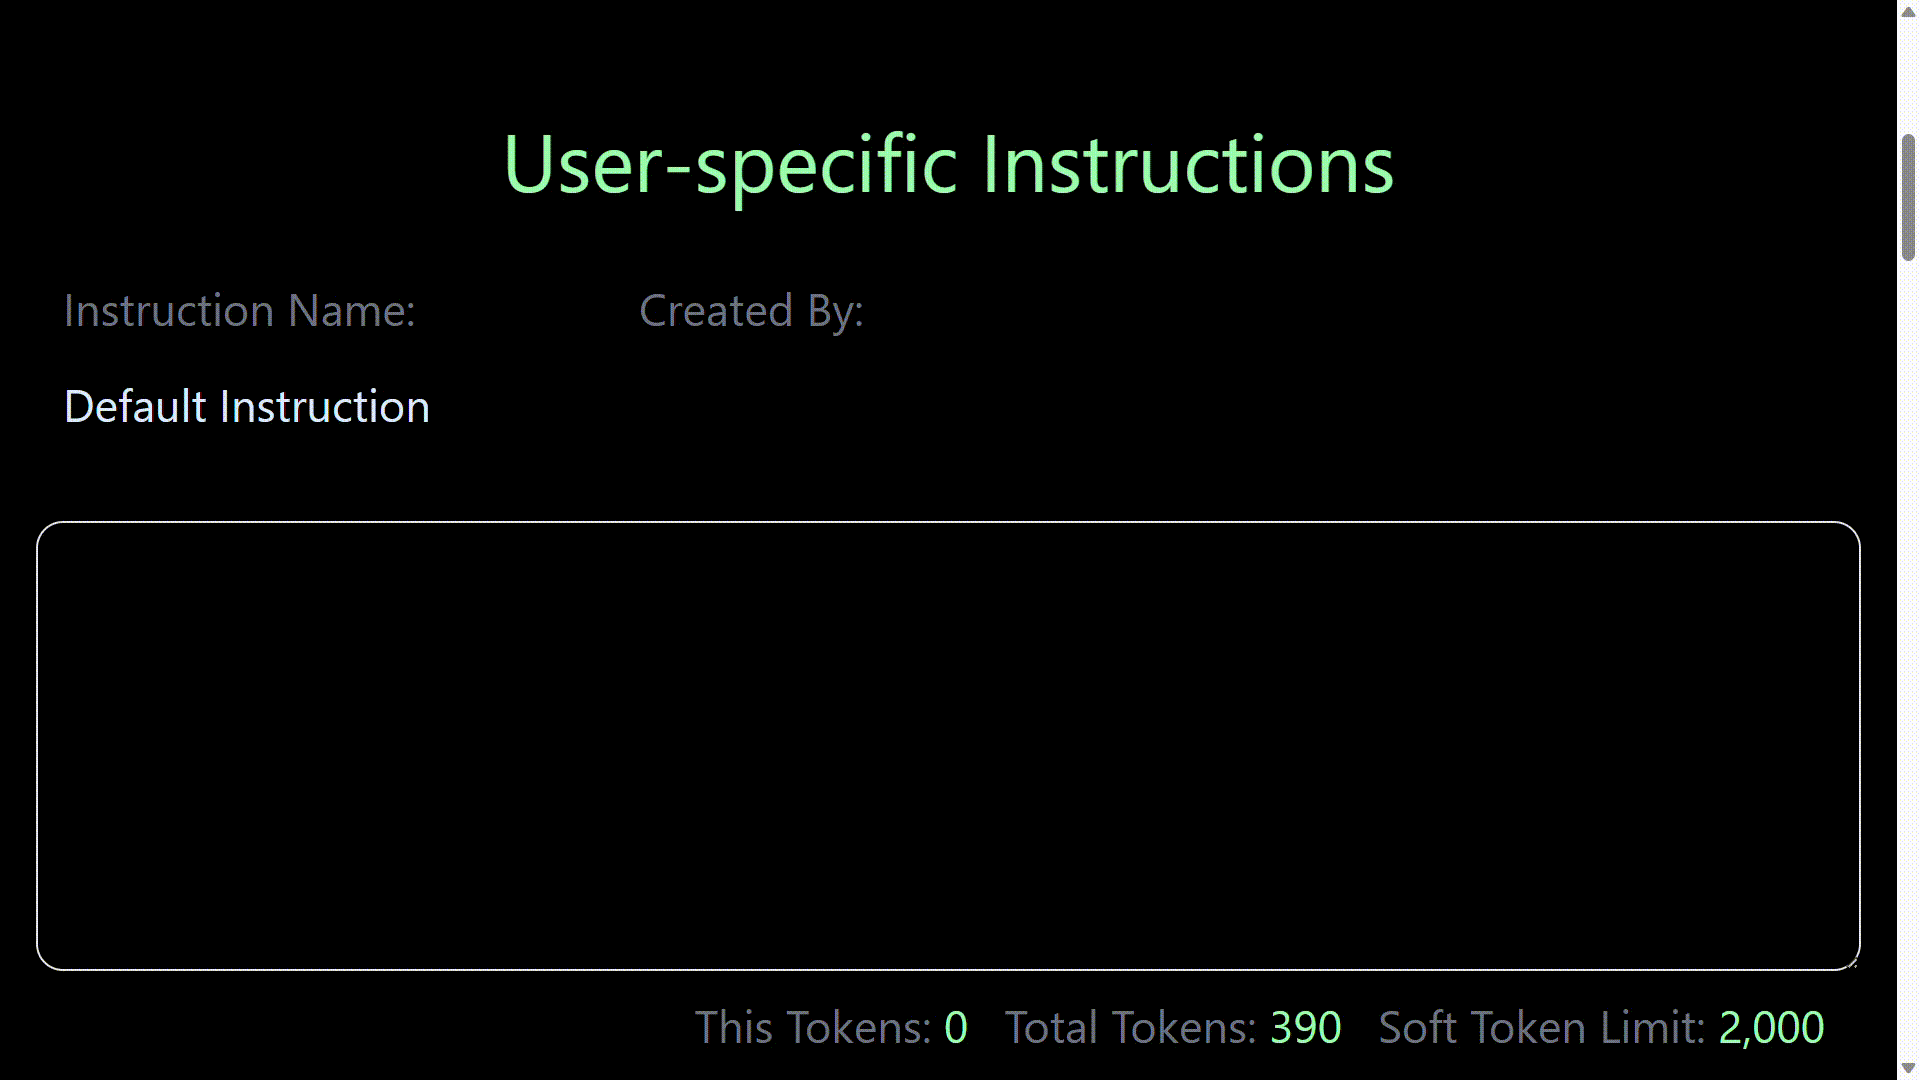 User-specific Instruction